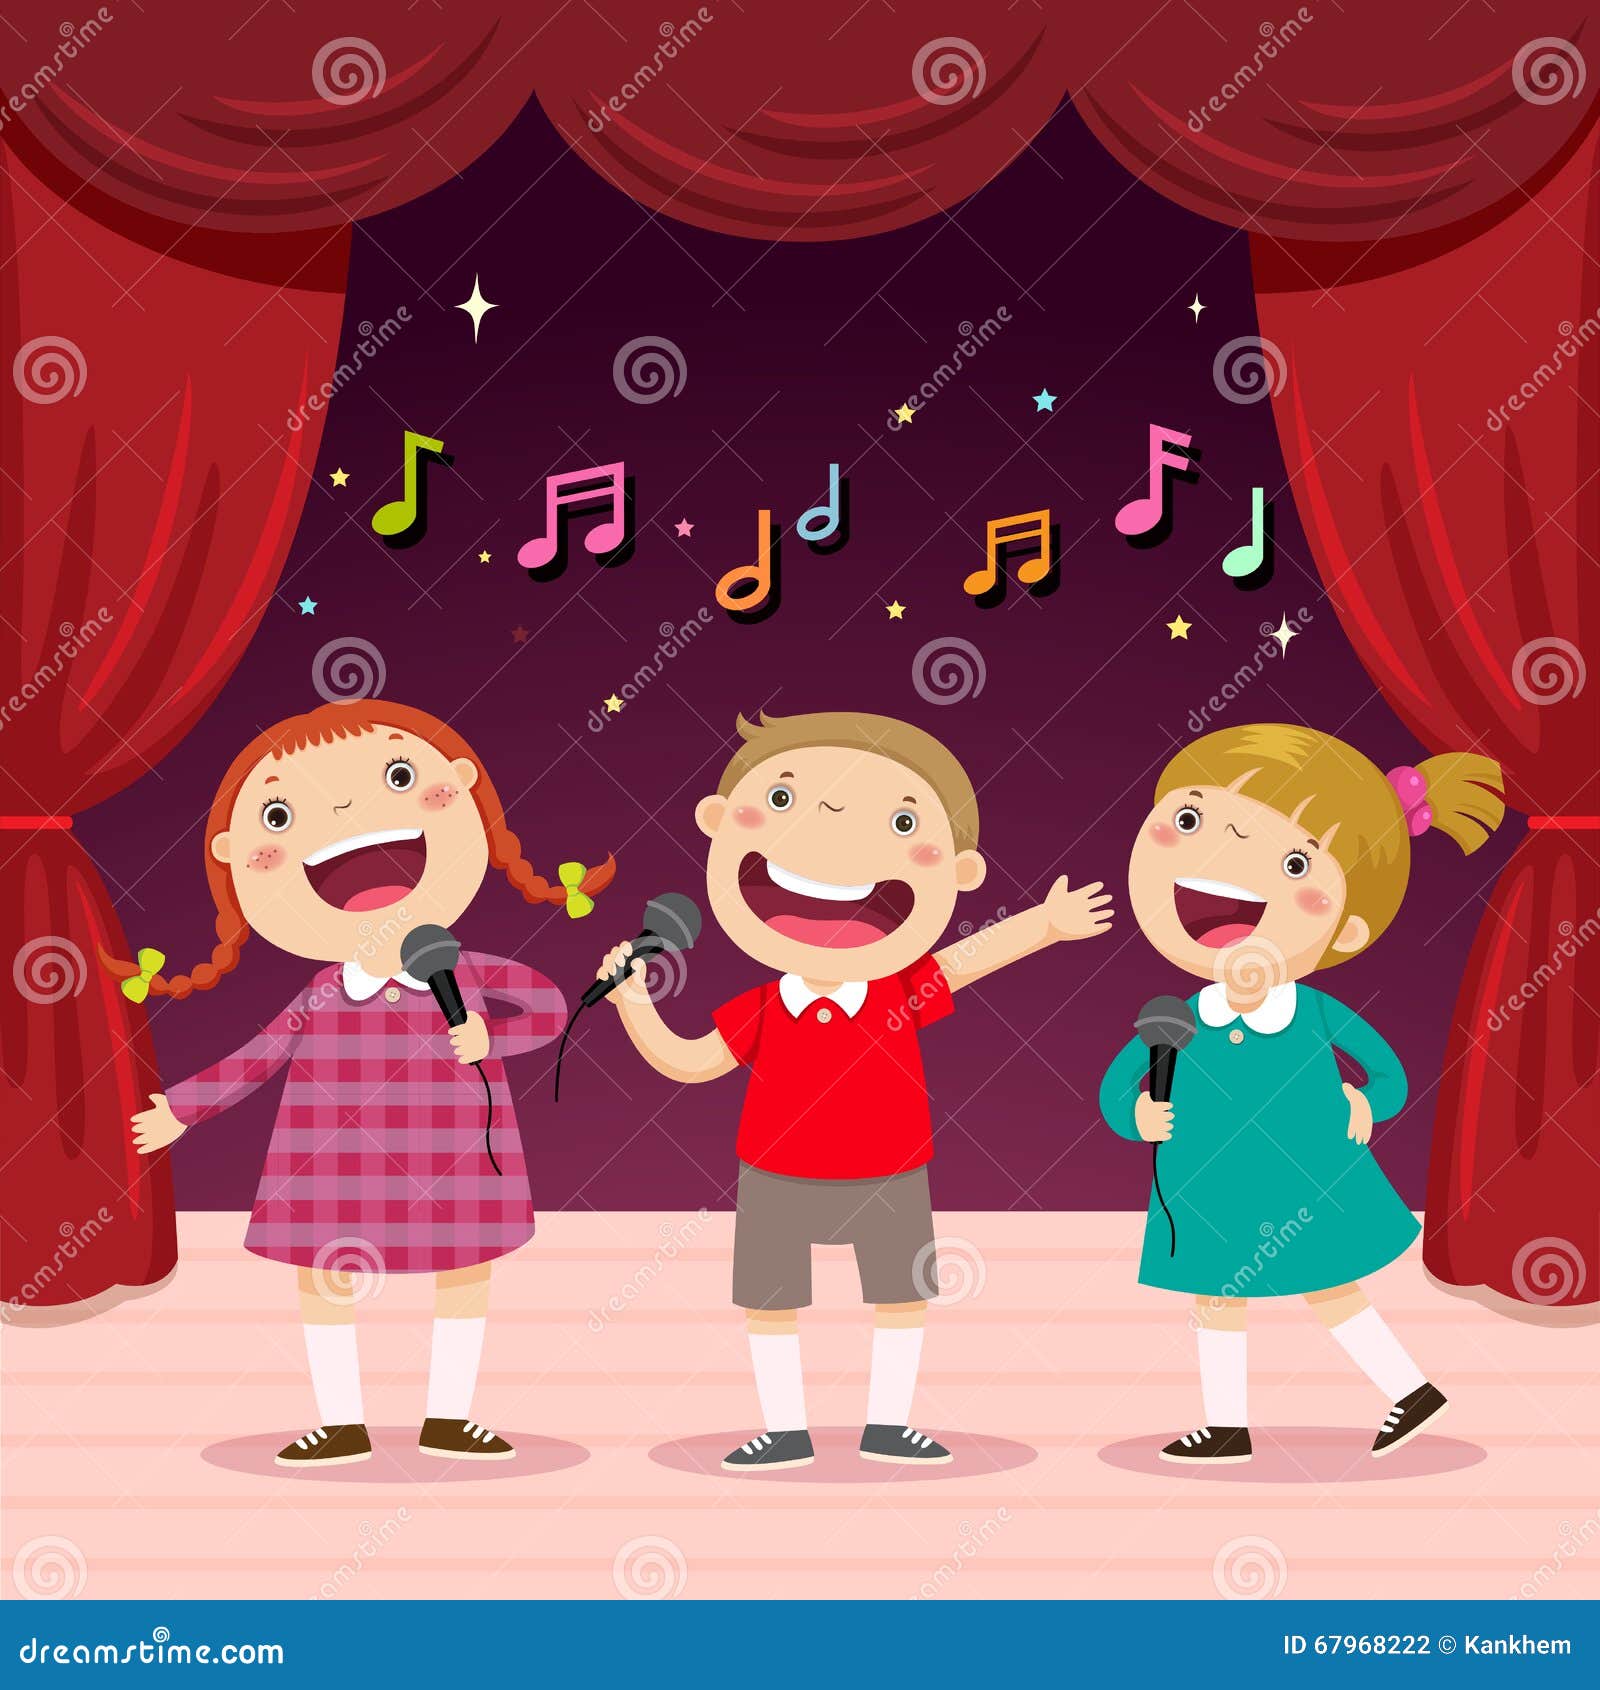 children sing with a microphone on the stage